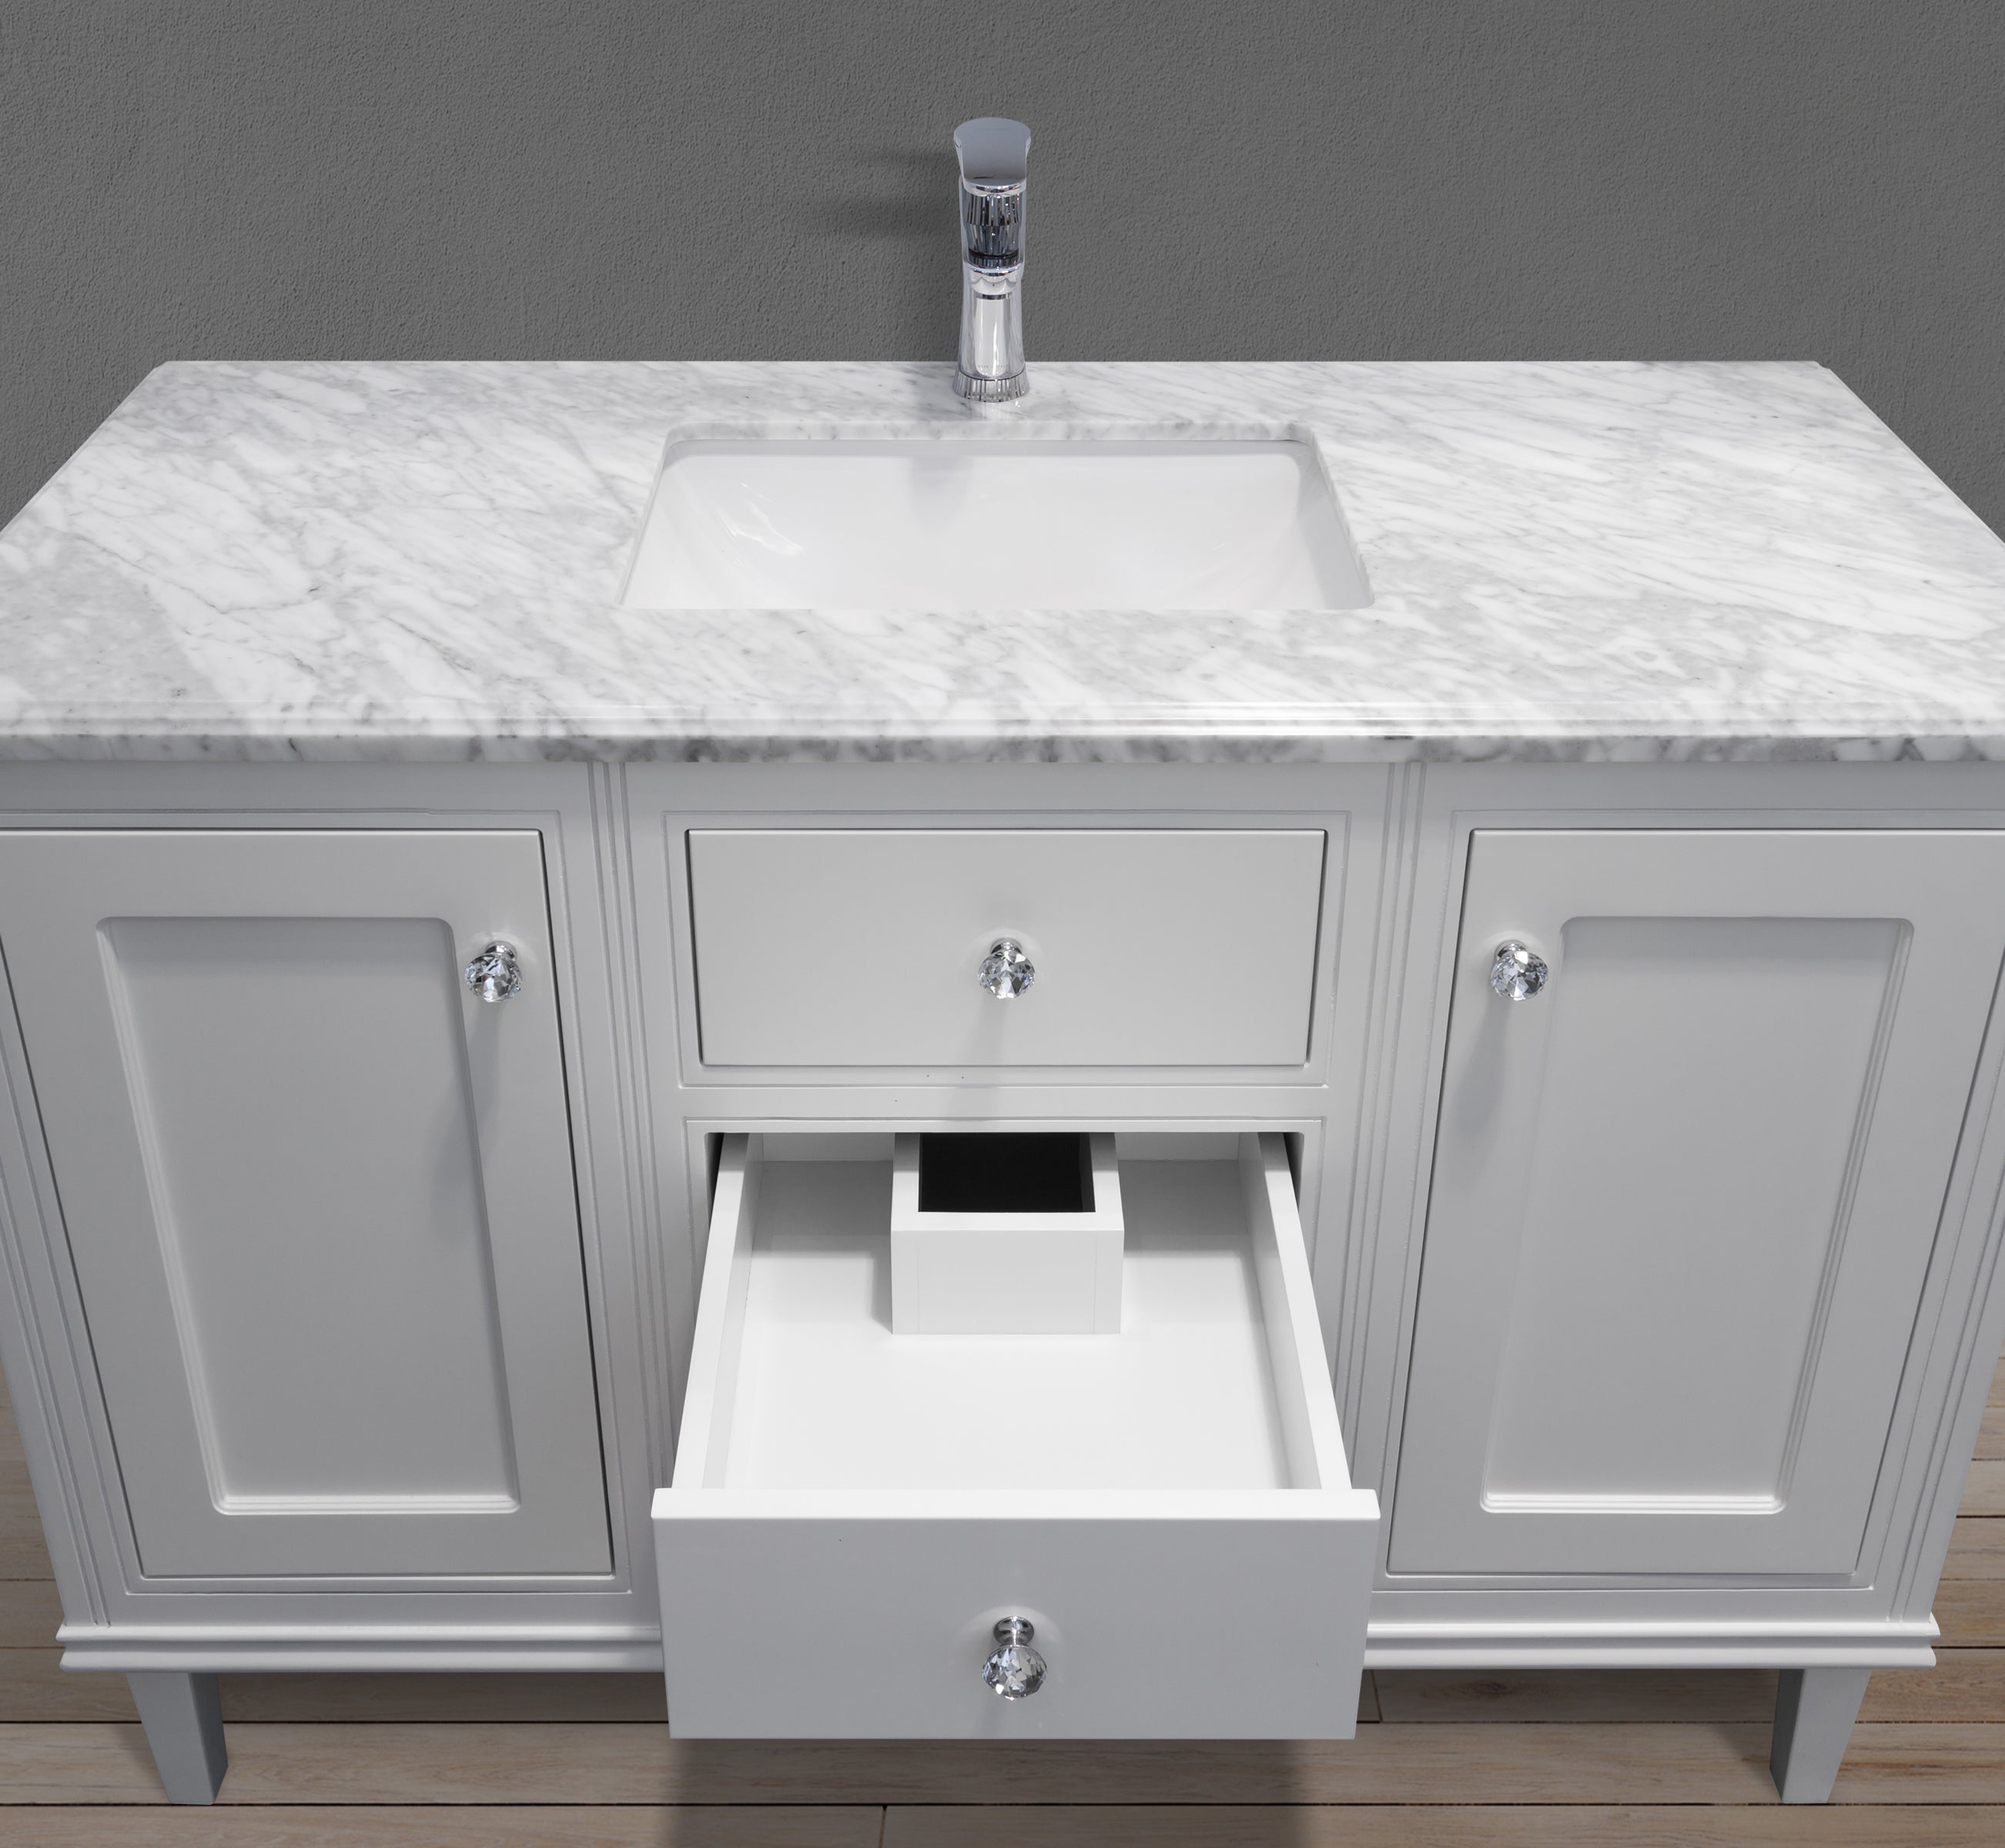 MC 4005-48 basin view with U shaped drawer open #size_48"